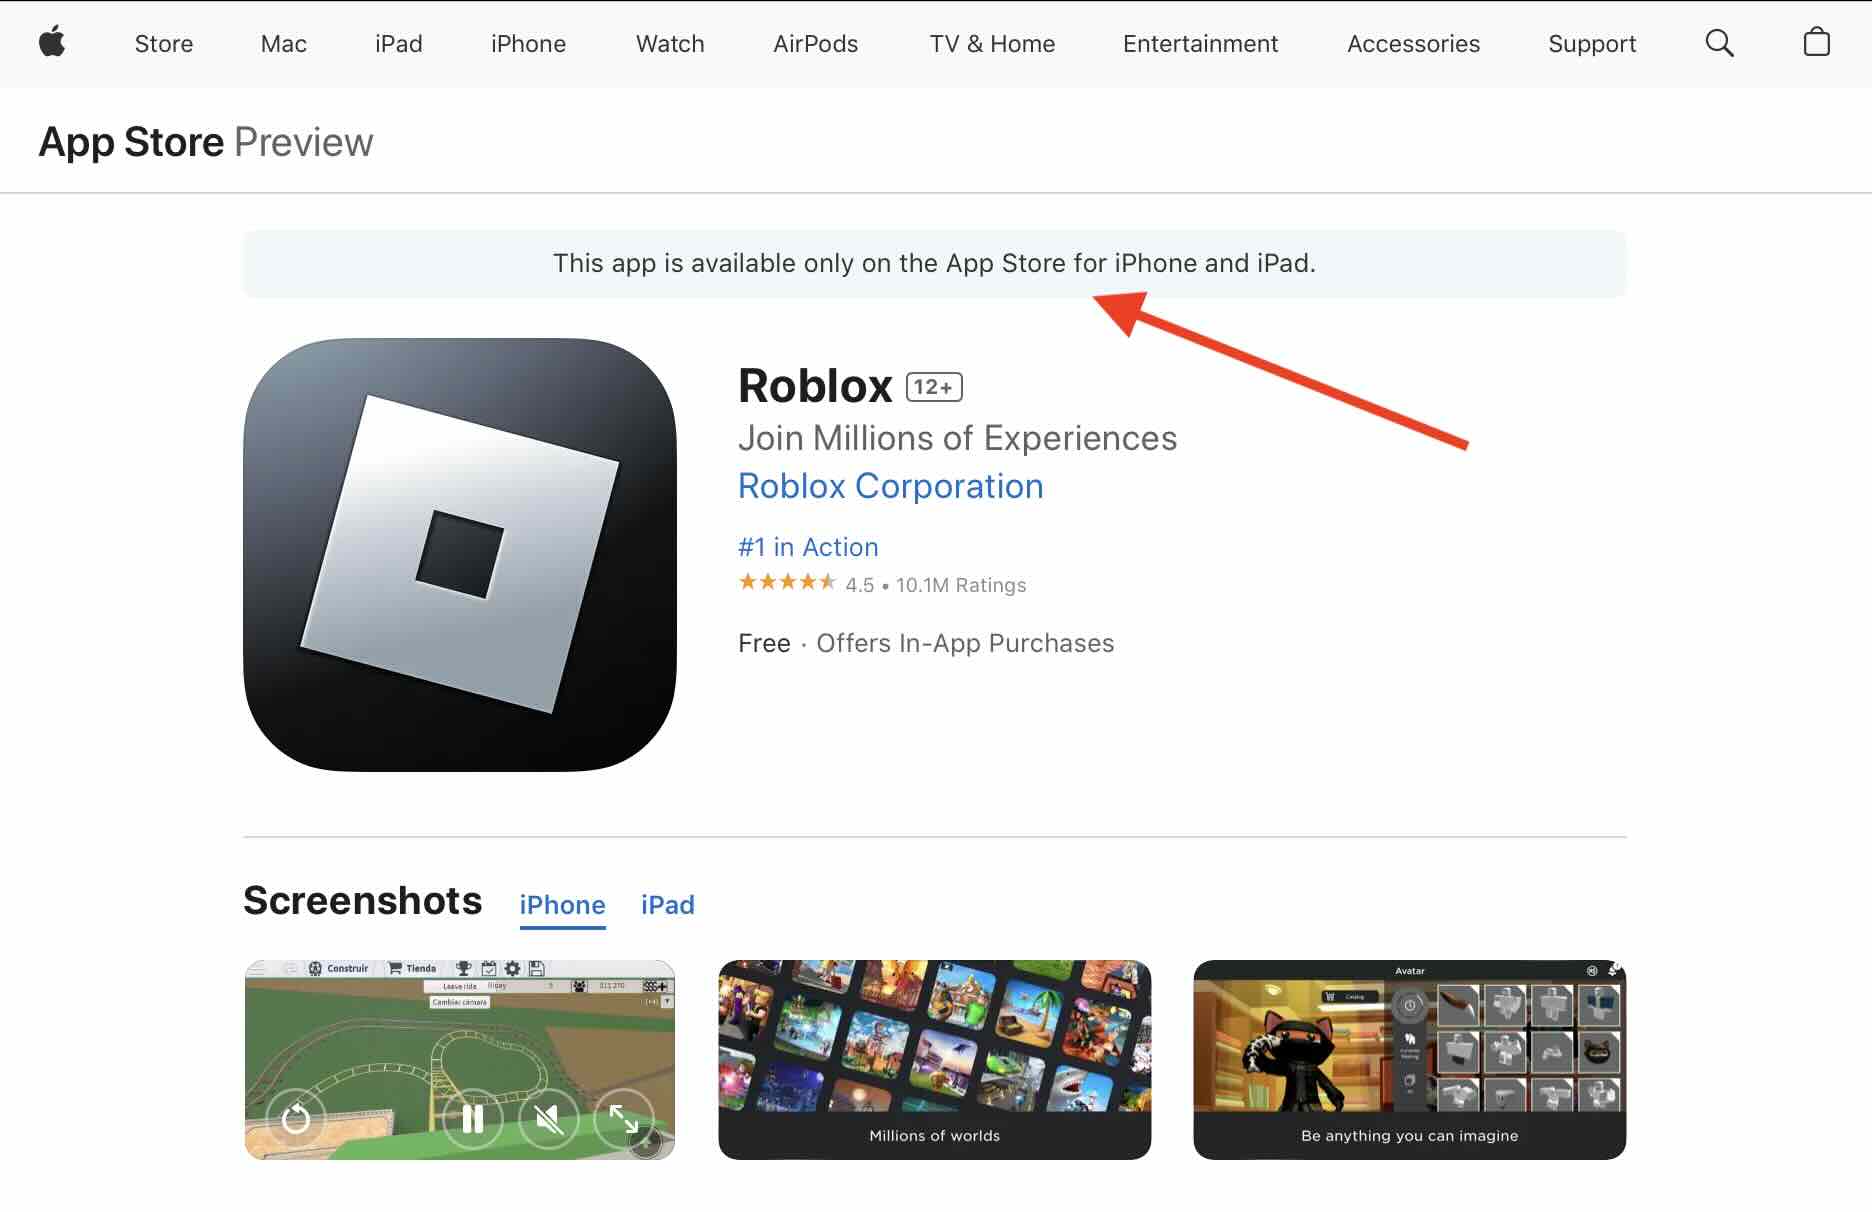 Roblox app is available only on the App Store for iPhone and iPad.